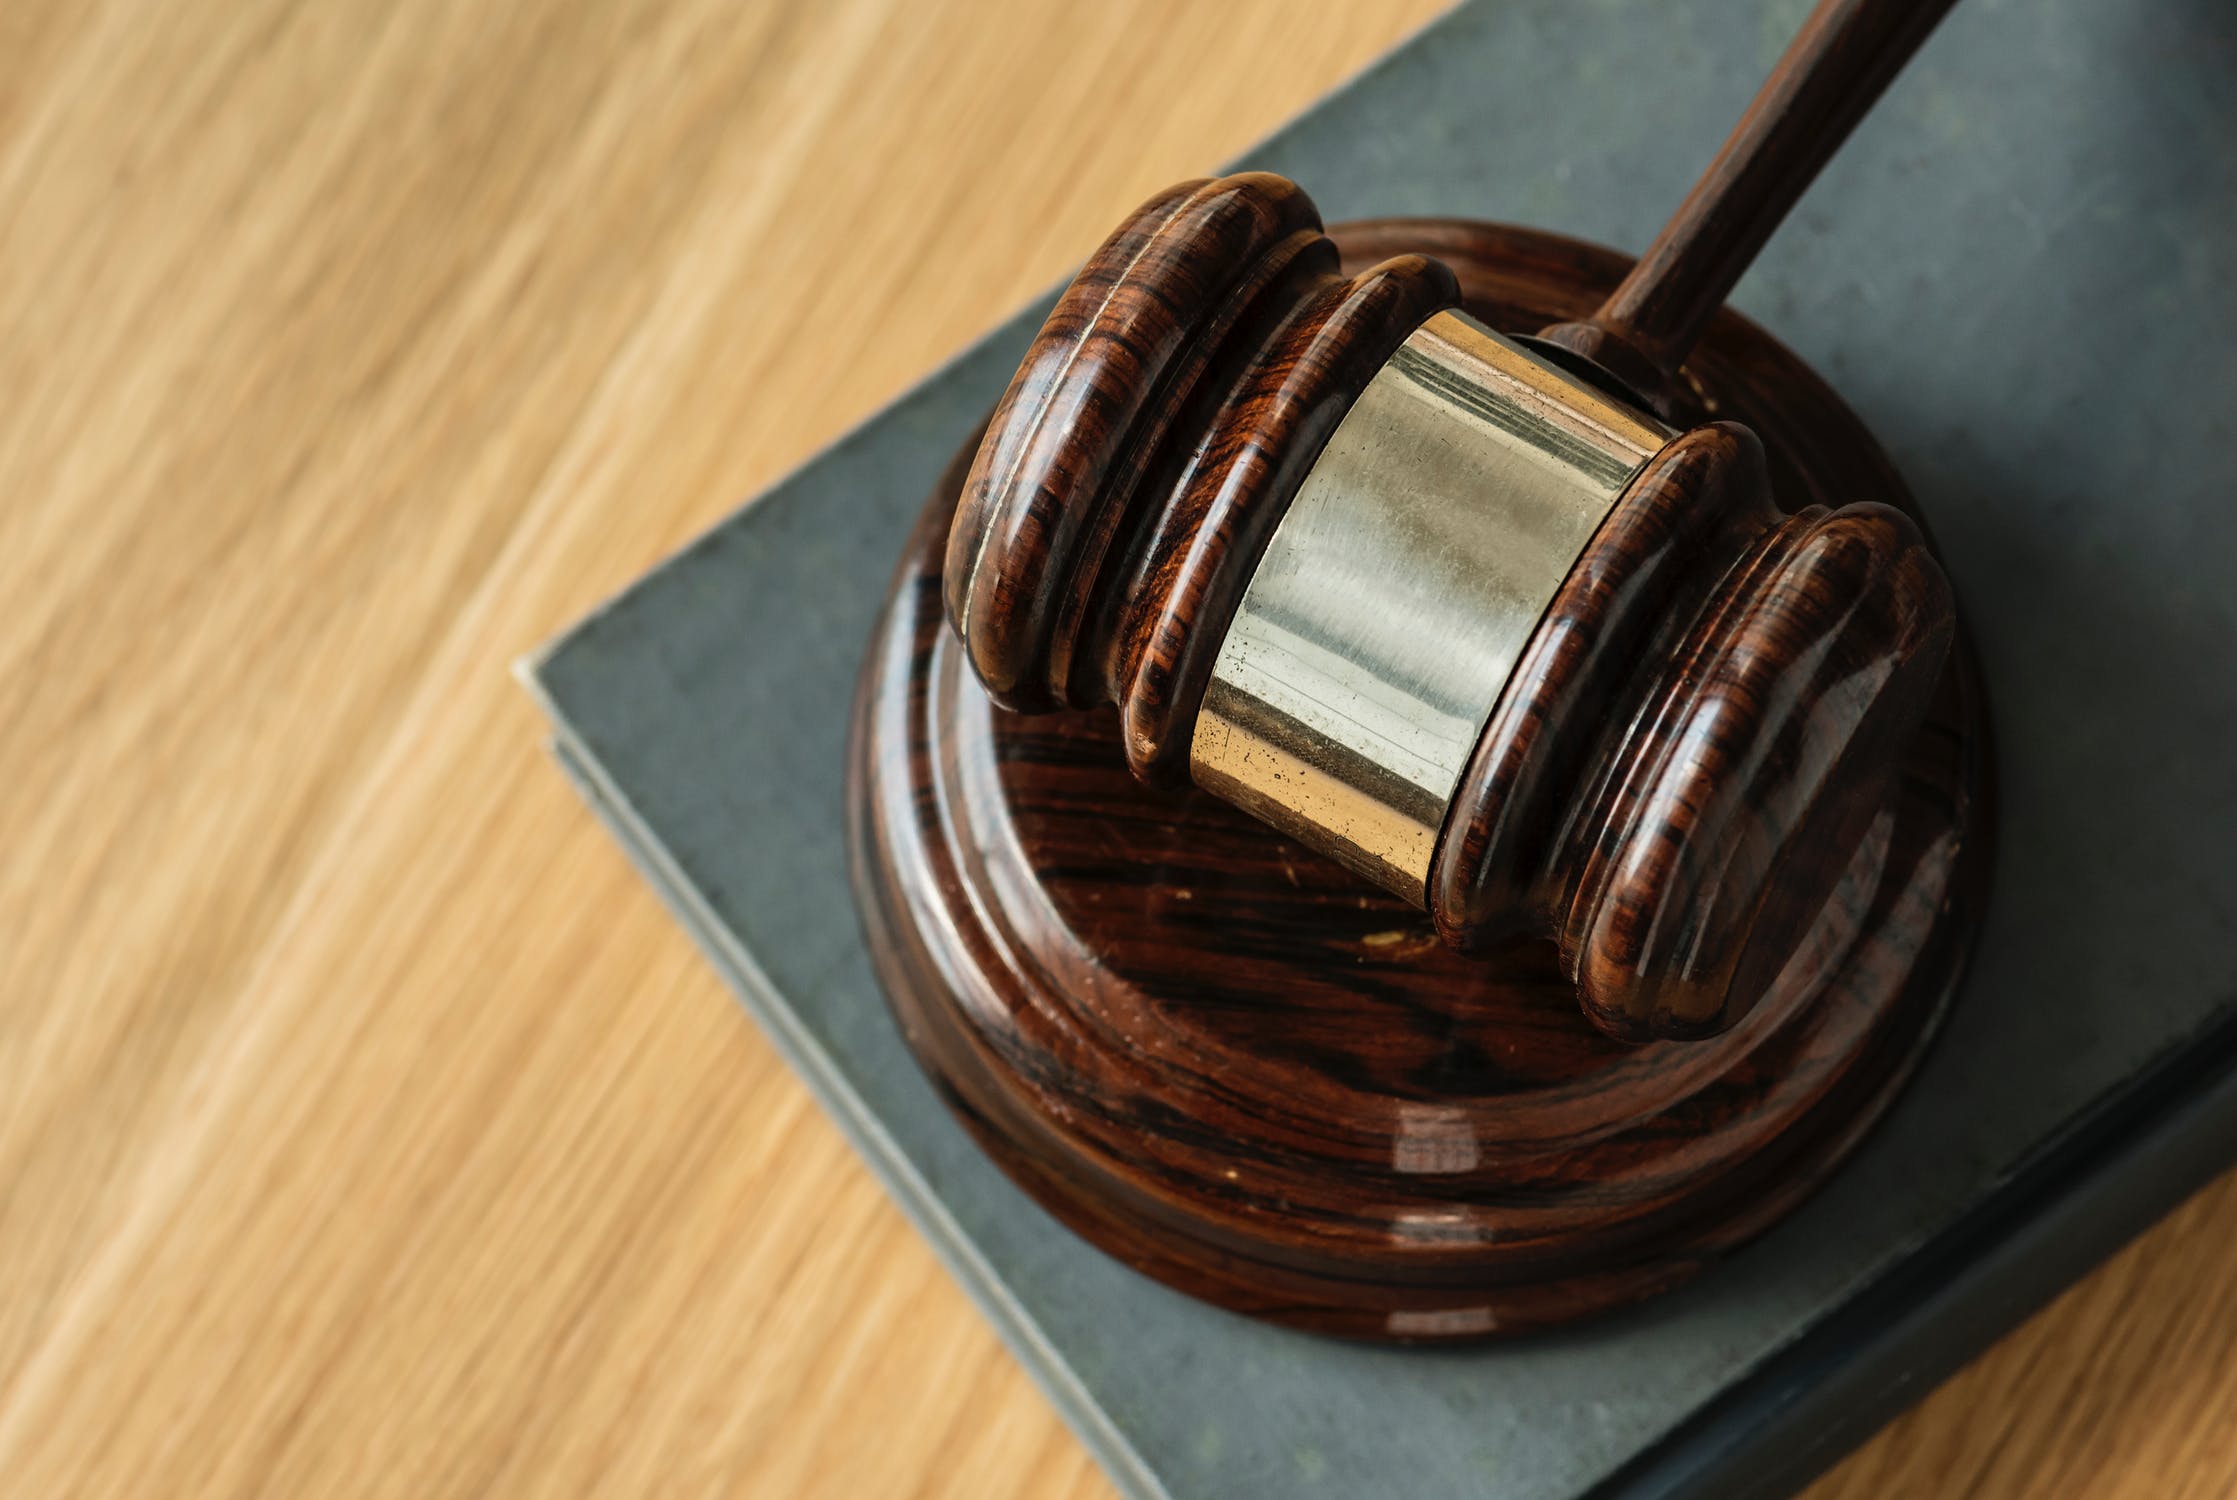 When does a criminal conviction justify dismissal?